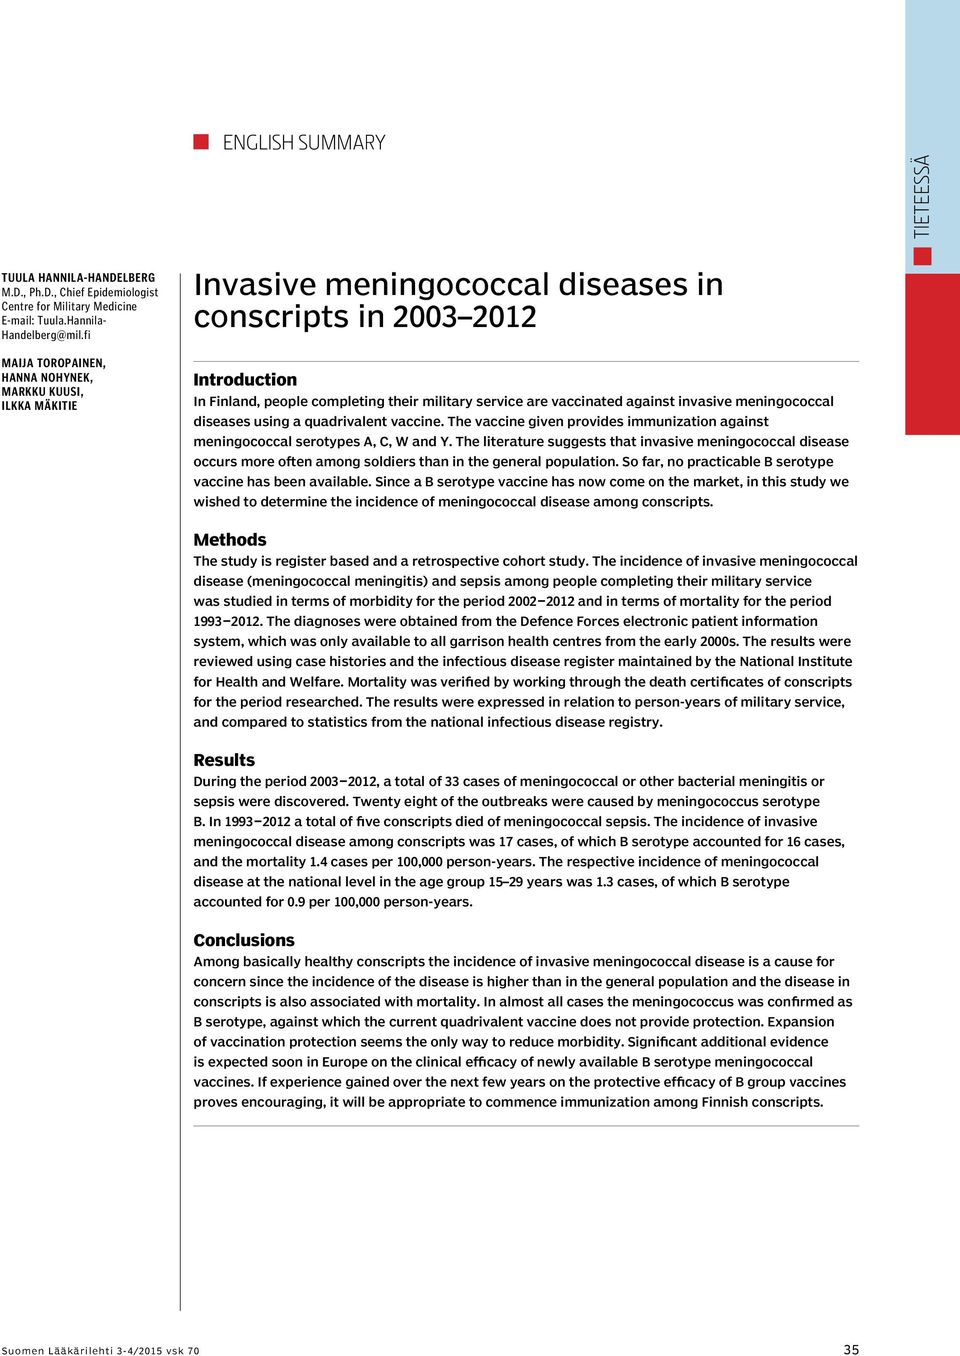 vaccinated against invasive meningococcal diseases using a quadrivalent vaccine. The vaccine given provides immunization against meningococcal serotypes A, C, W and Y.